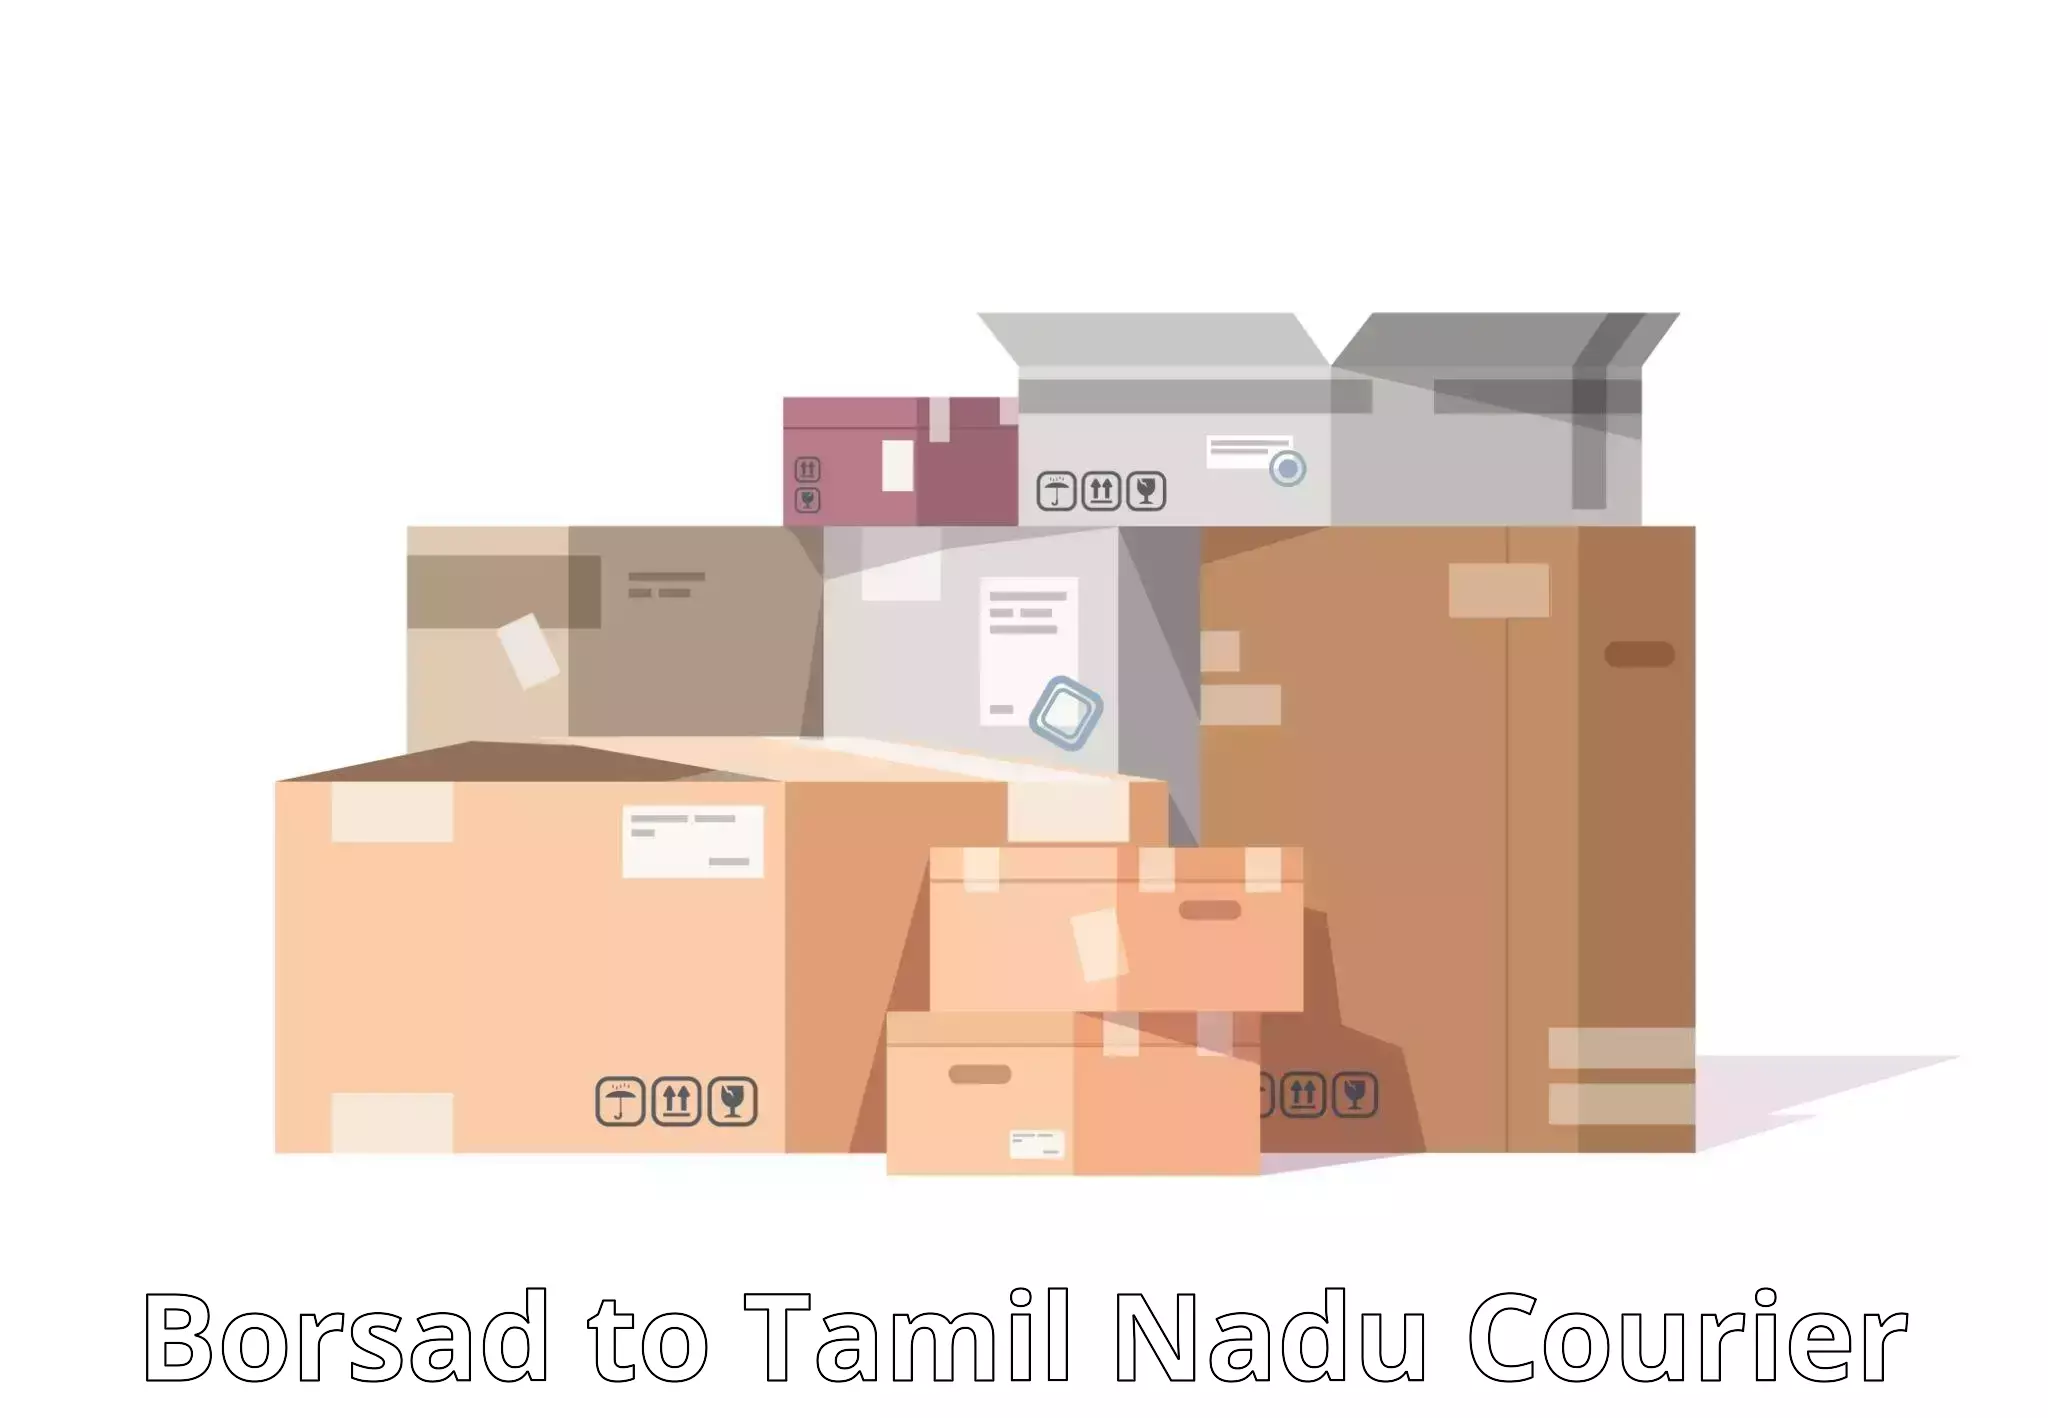 Nationwide delivery network Borsad to Tamil Nadu